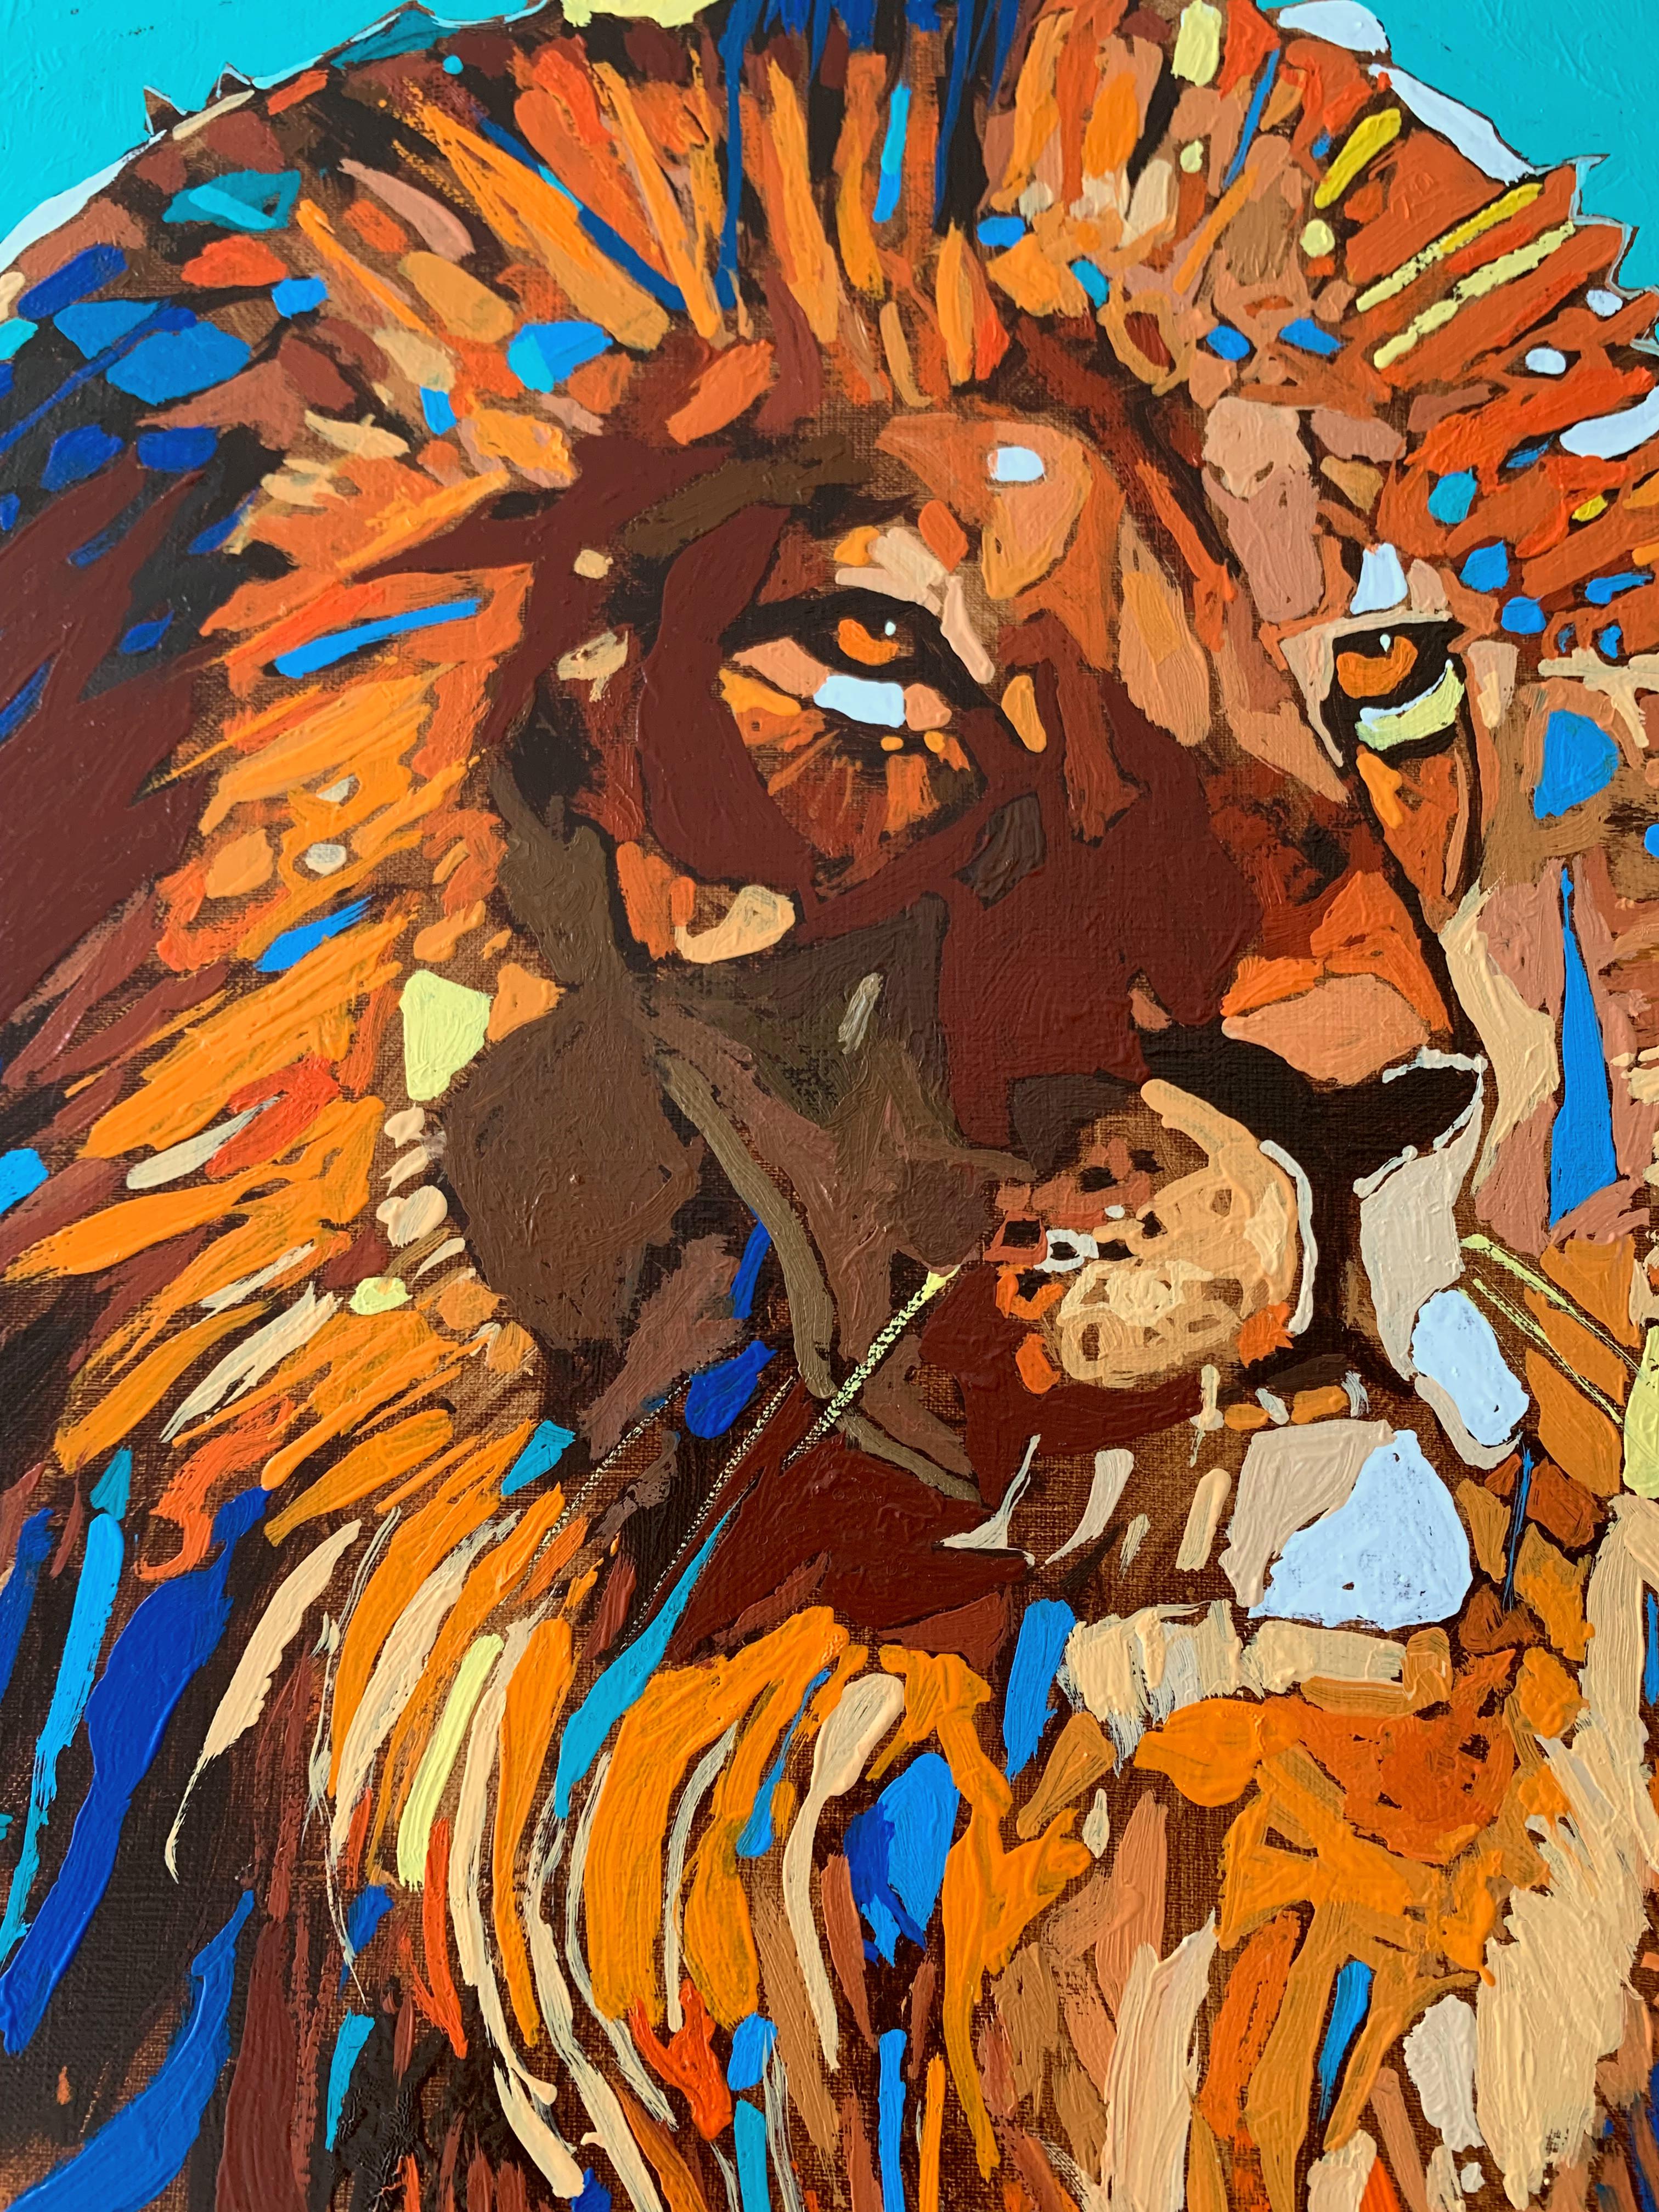 Contemporary figurative oil on canvas painting by Polish artist Rafal Gadowski. Painting in pop art style depicting two lions. The background is geometric and mostly in teal. Painting is bright with many dynamic shapes. Title of this painting is